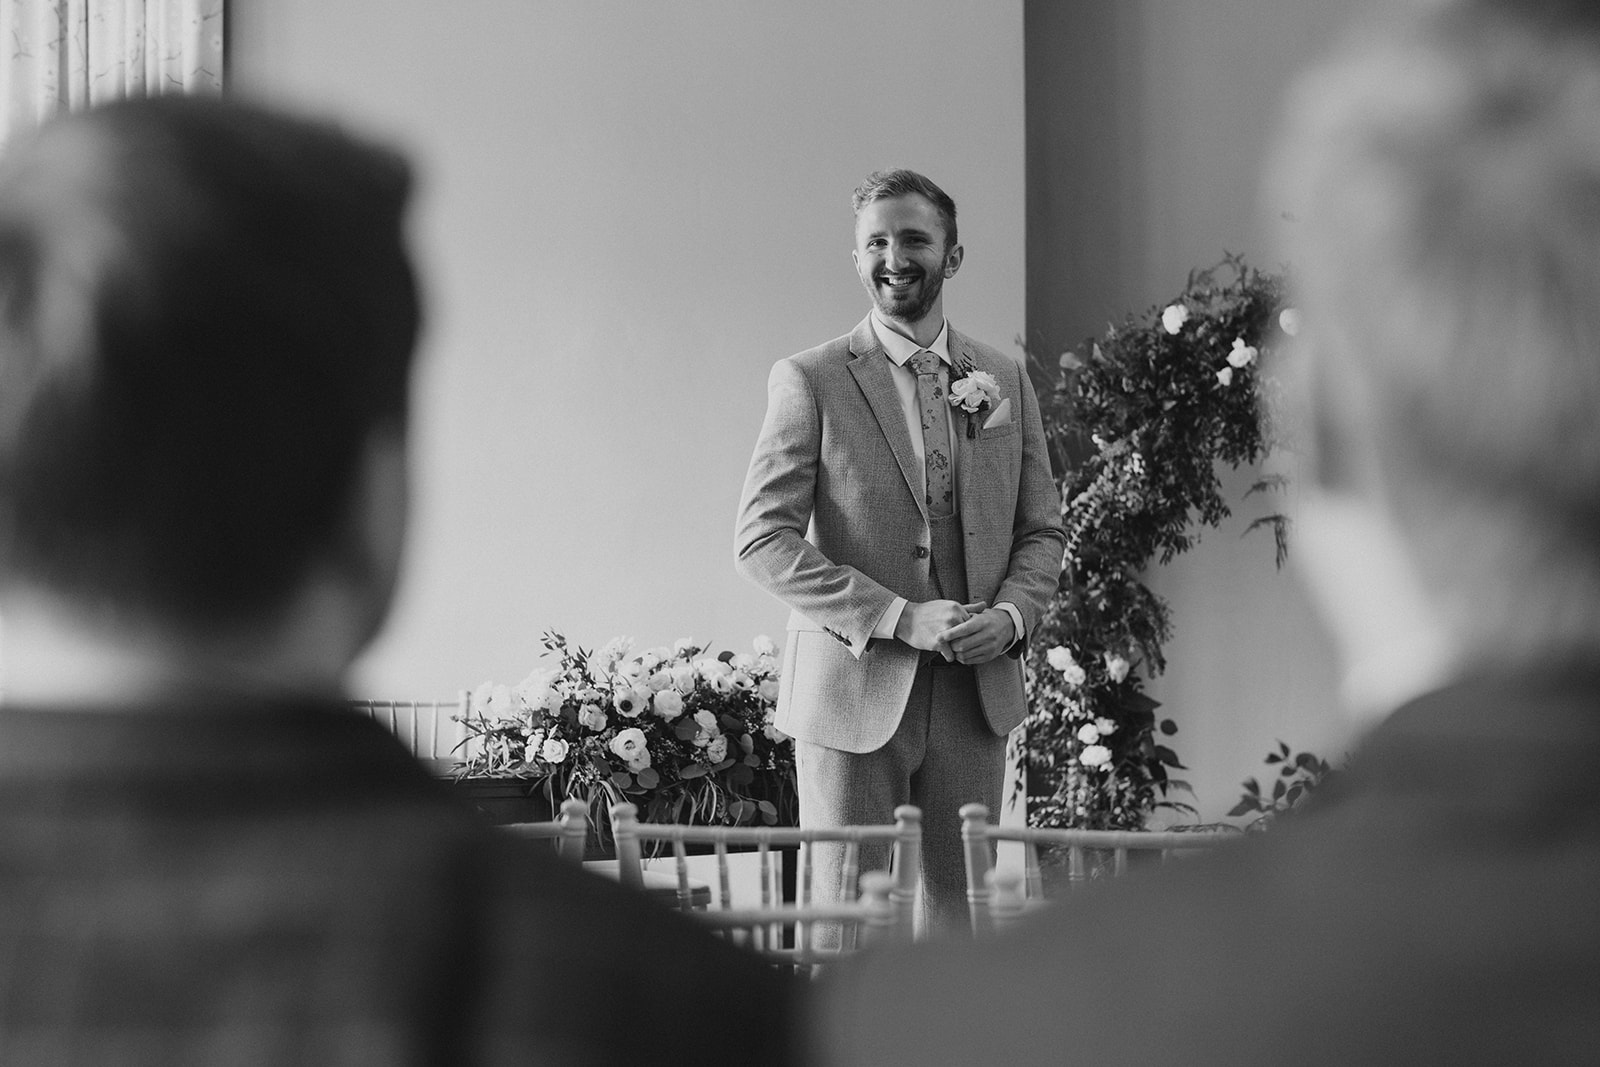 The groom, laughing, waiting for the start of the wedding ceremony